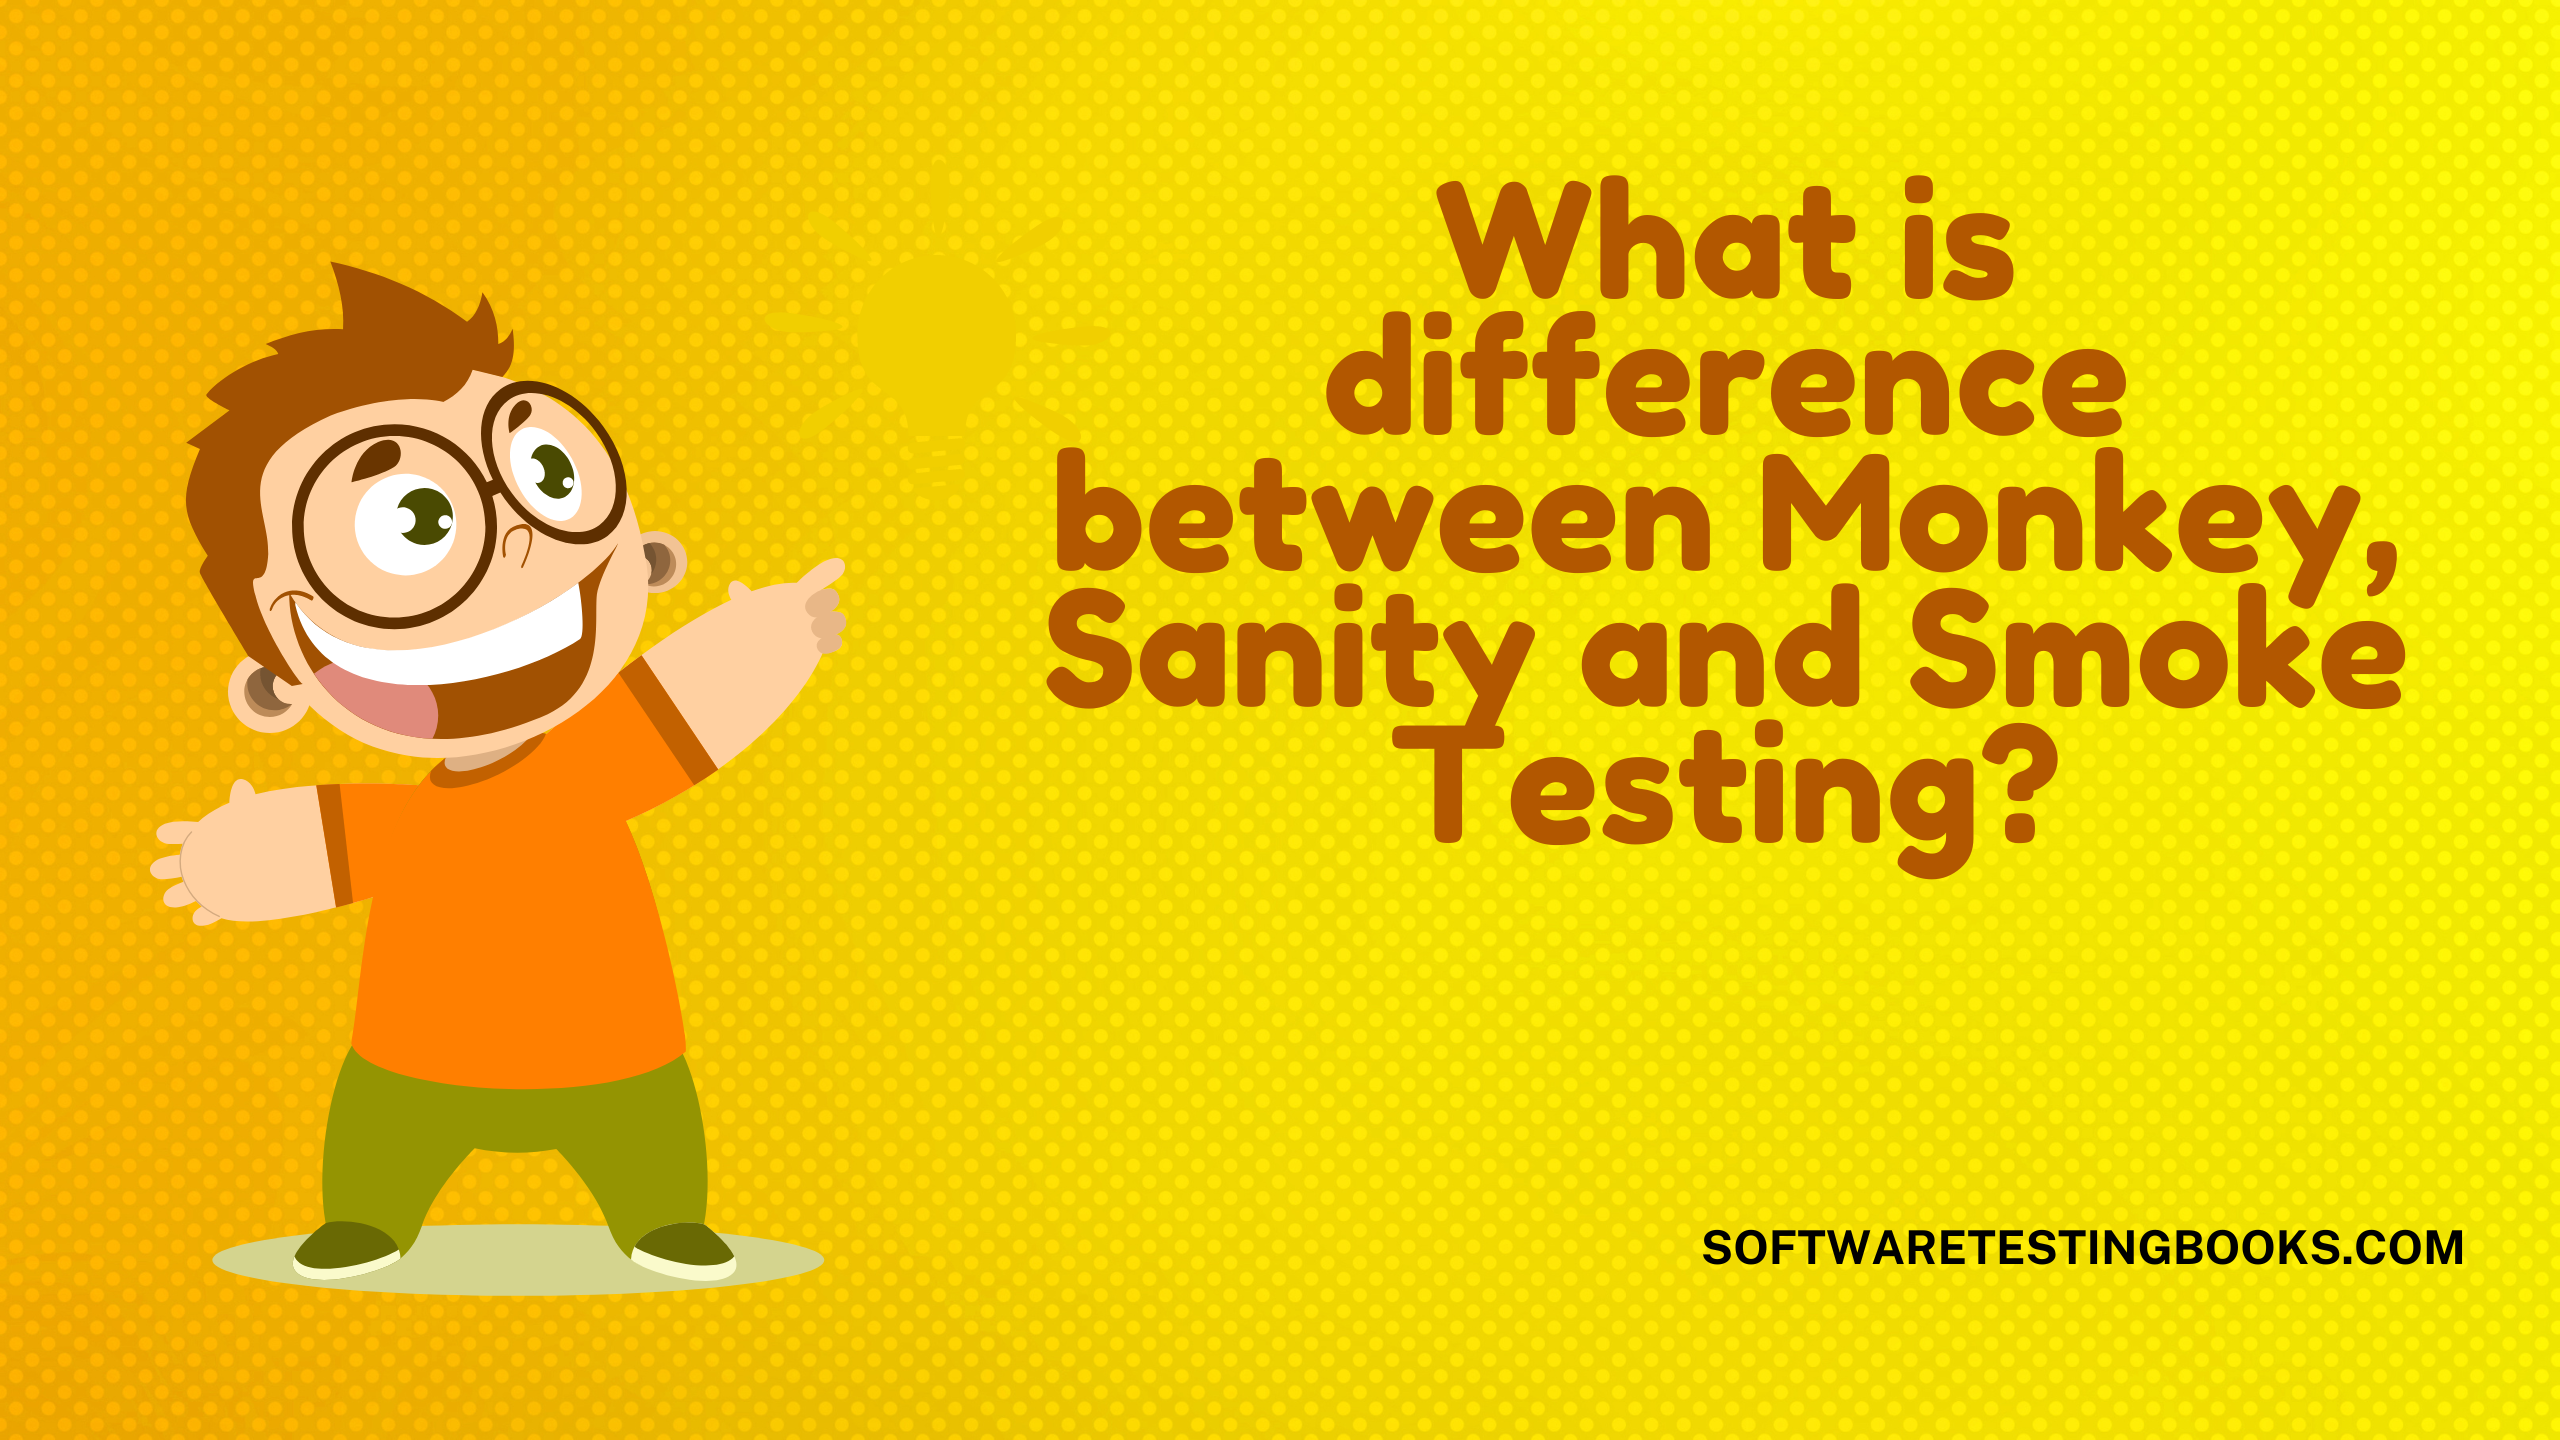 What is difference between Monkey, Sanity and Smoke Testing?